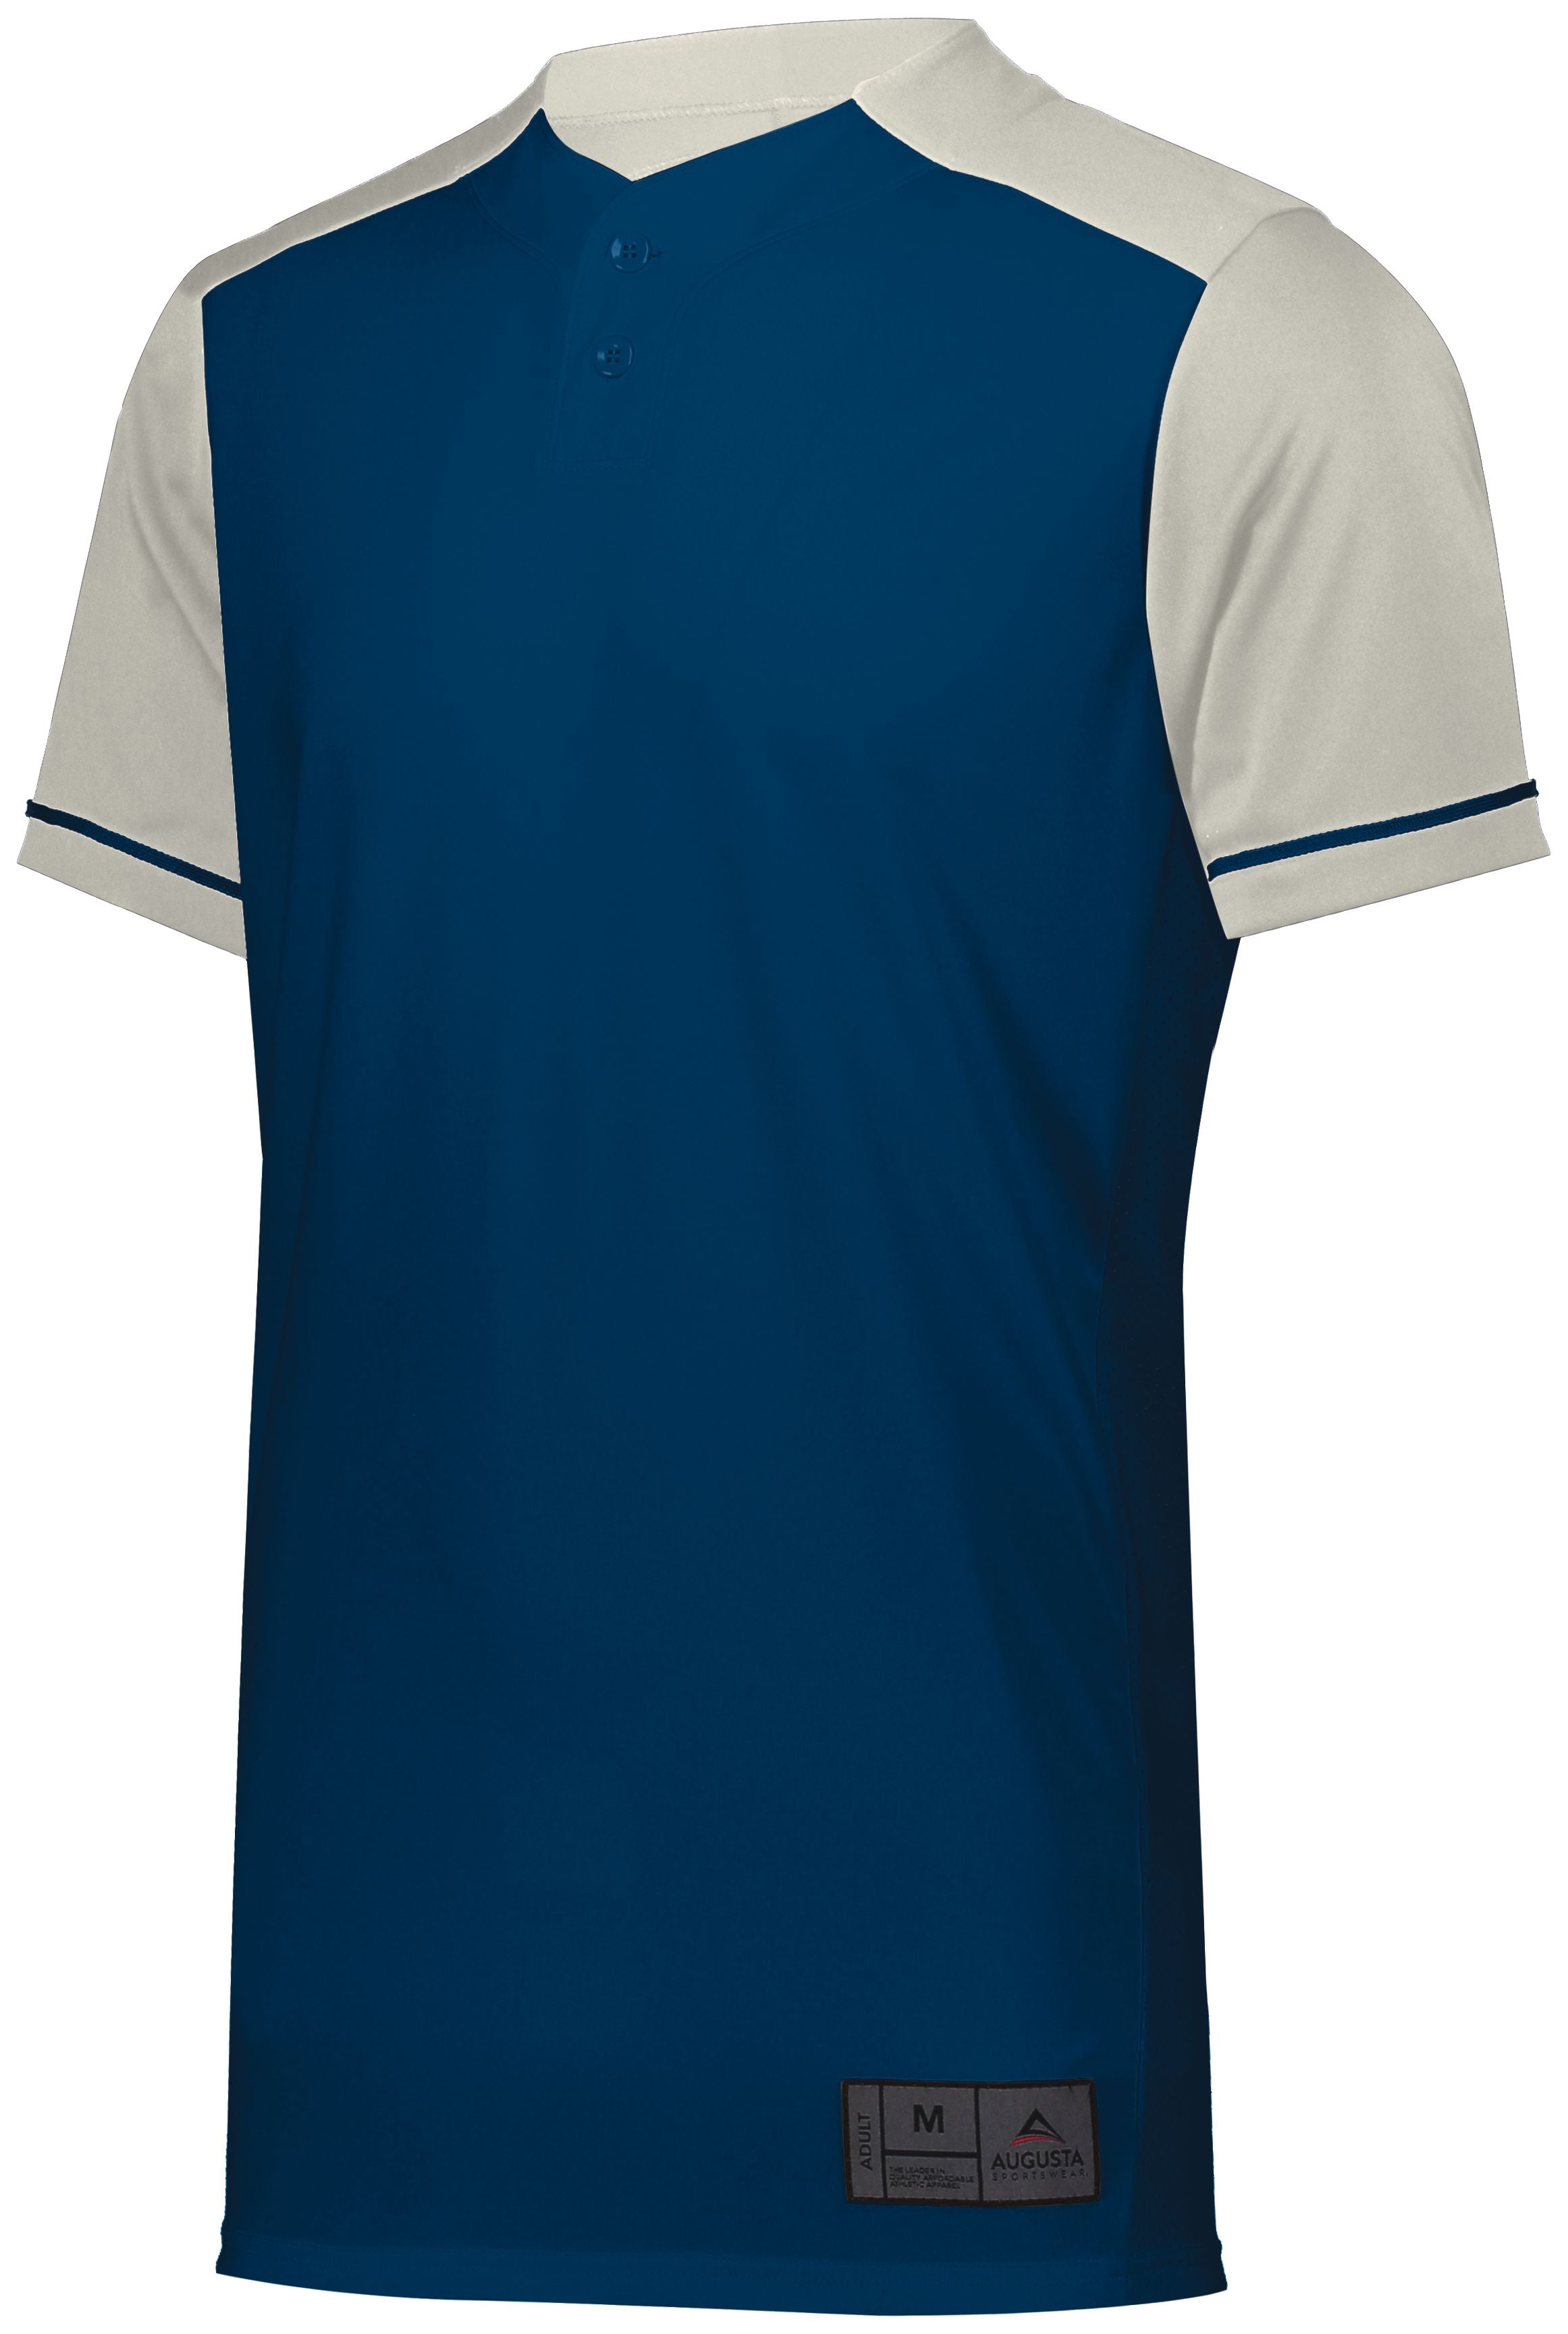 Augusta Sportswear Closer Jersey in Navy/Silver Grey  -Part of the Adult, Adult-Jersey, Augusta-Products, Baseball, Shirts, All-Sports, All-Sports-1 product lines at KanaleyCreations.com